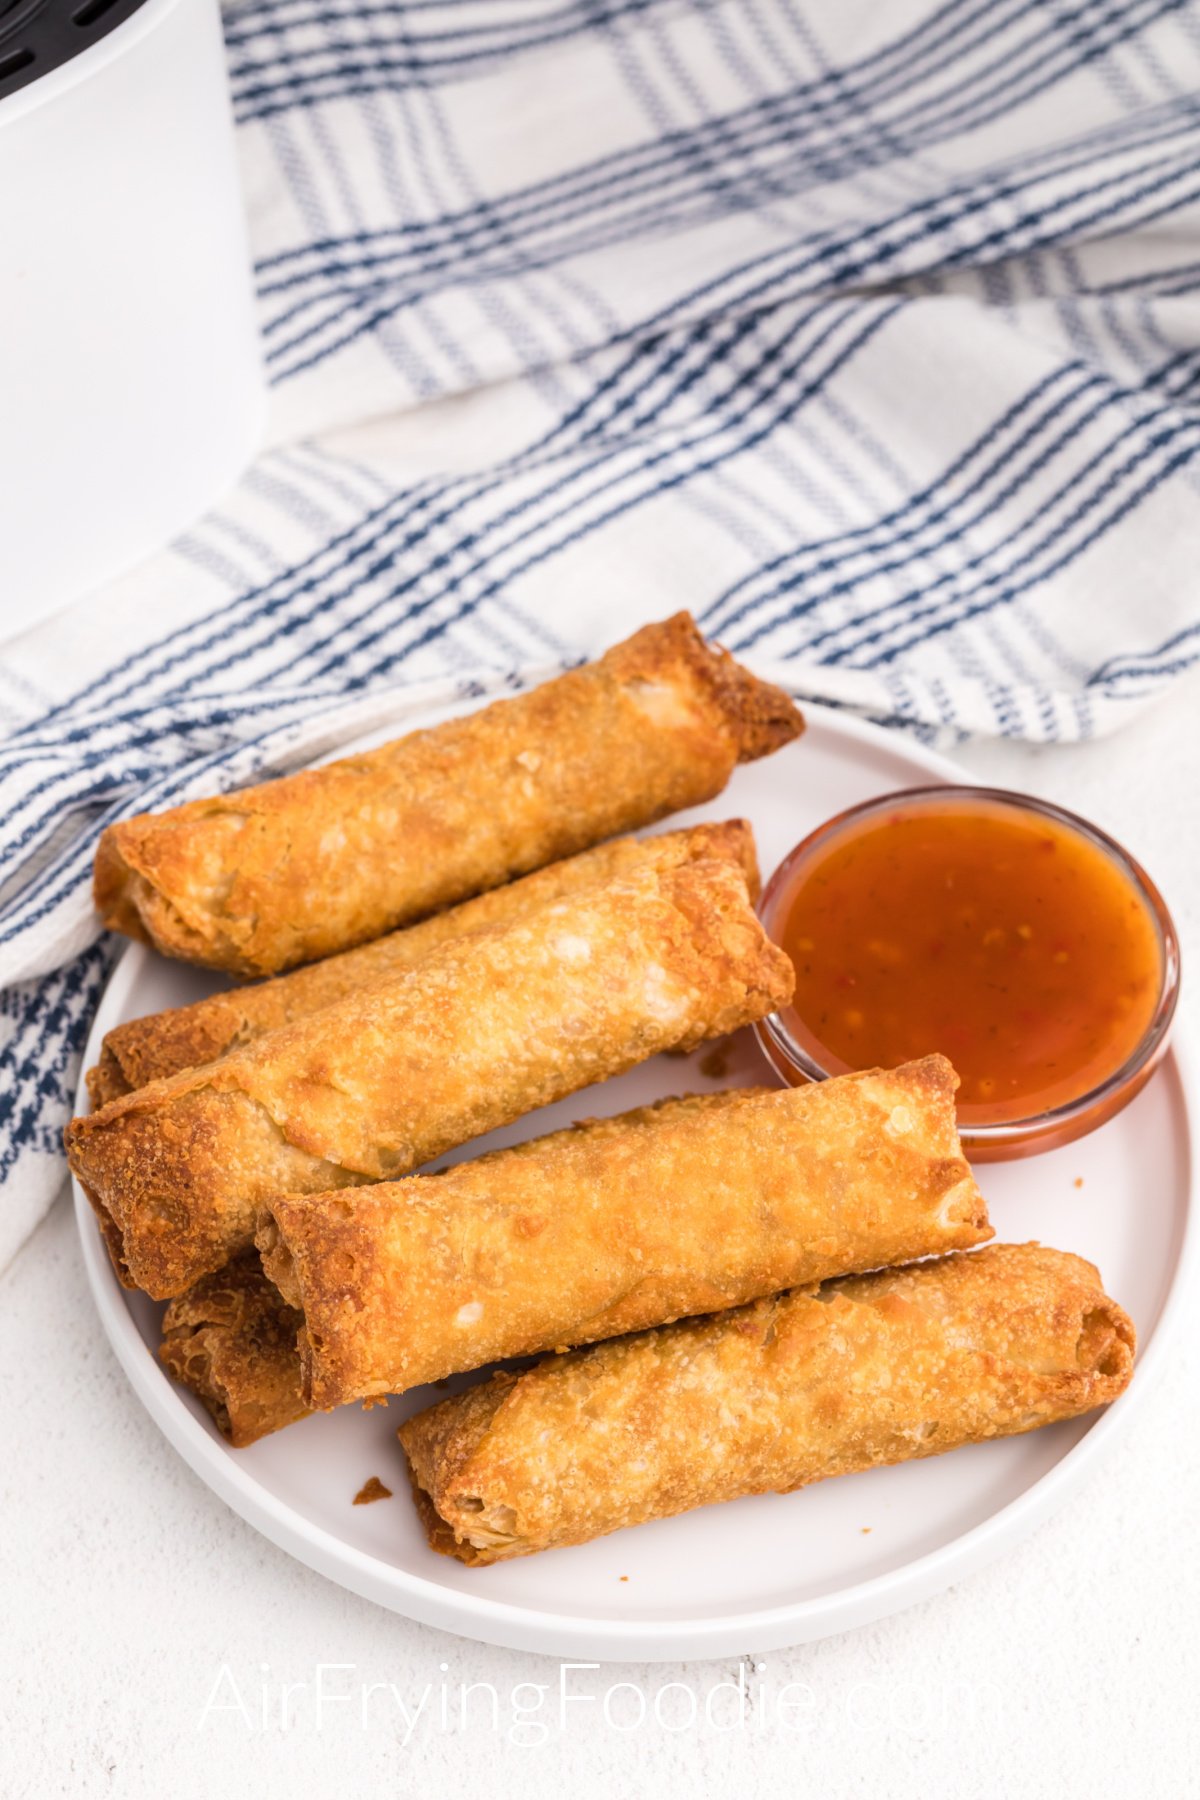 Frozen egg rolls that have been fully cooked in the air fryer. Served on a white plate with Thai chili sauce.